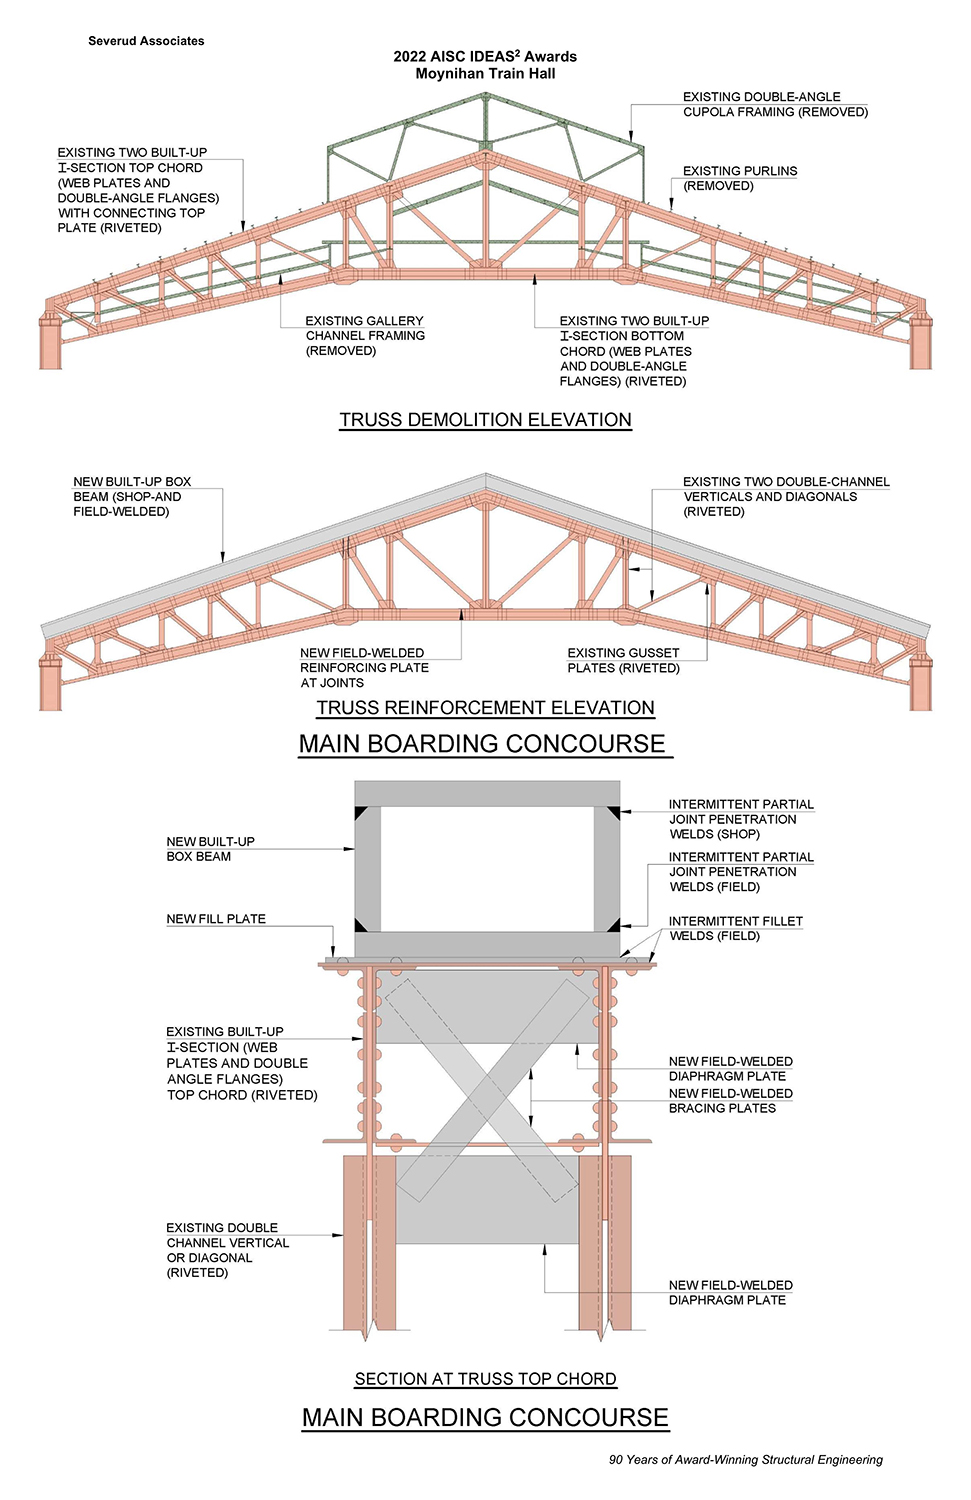 11_Moynihan Train Hall - 19 - Main Boarding Concourse - Truss Elevations and Section - drawings by Severud.jpg